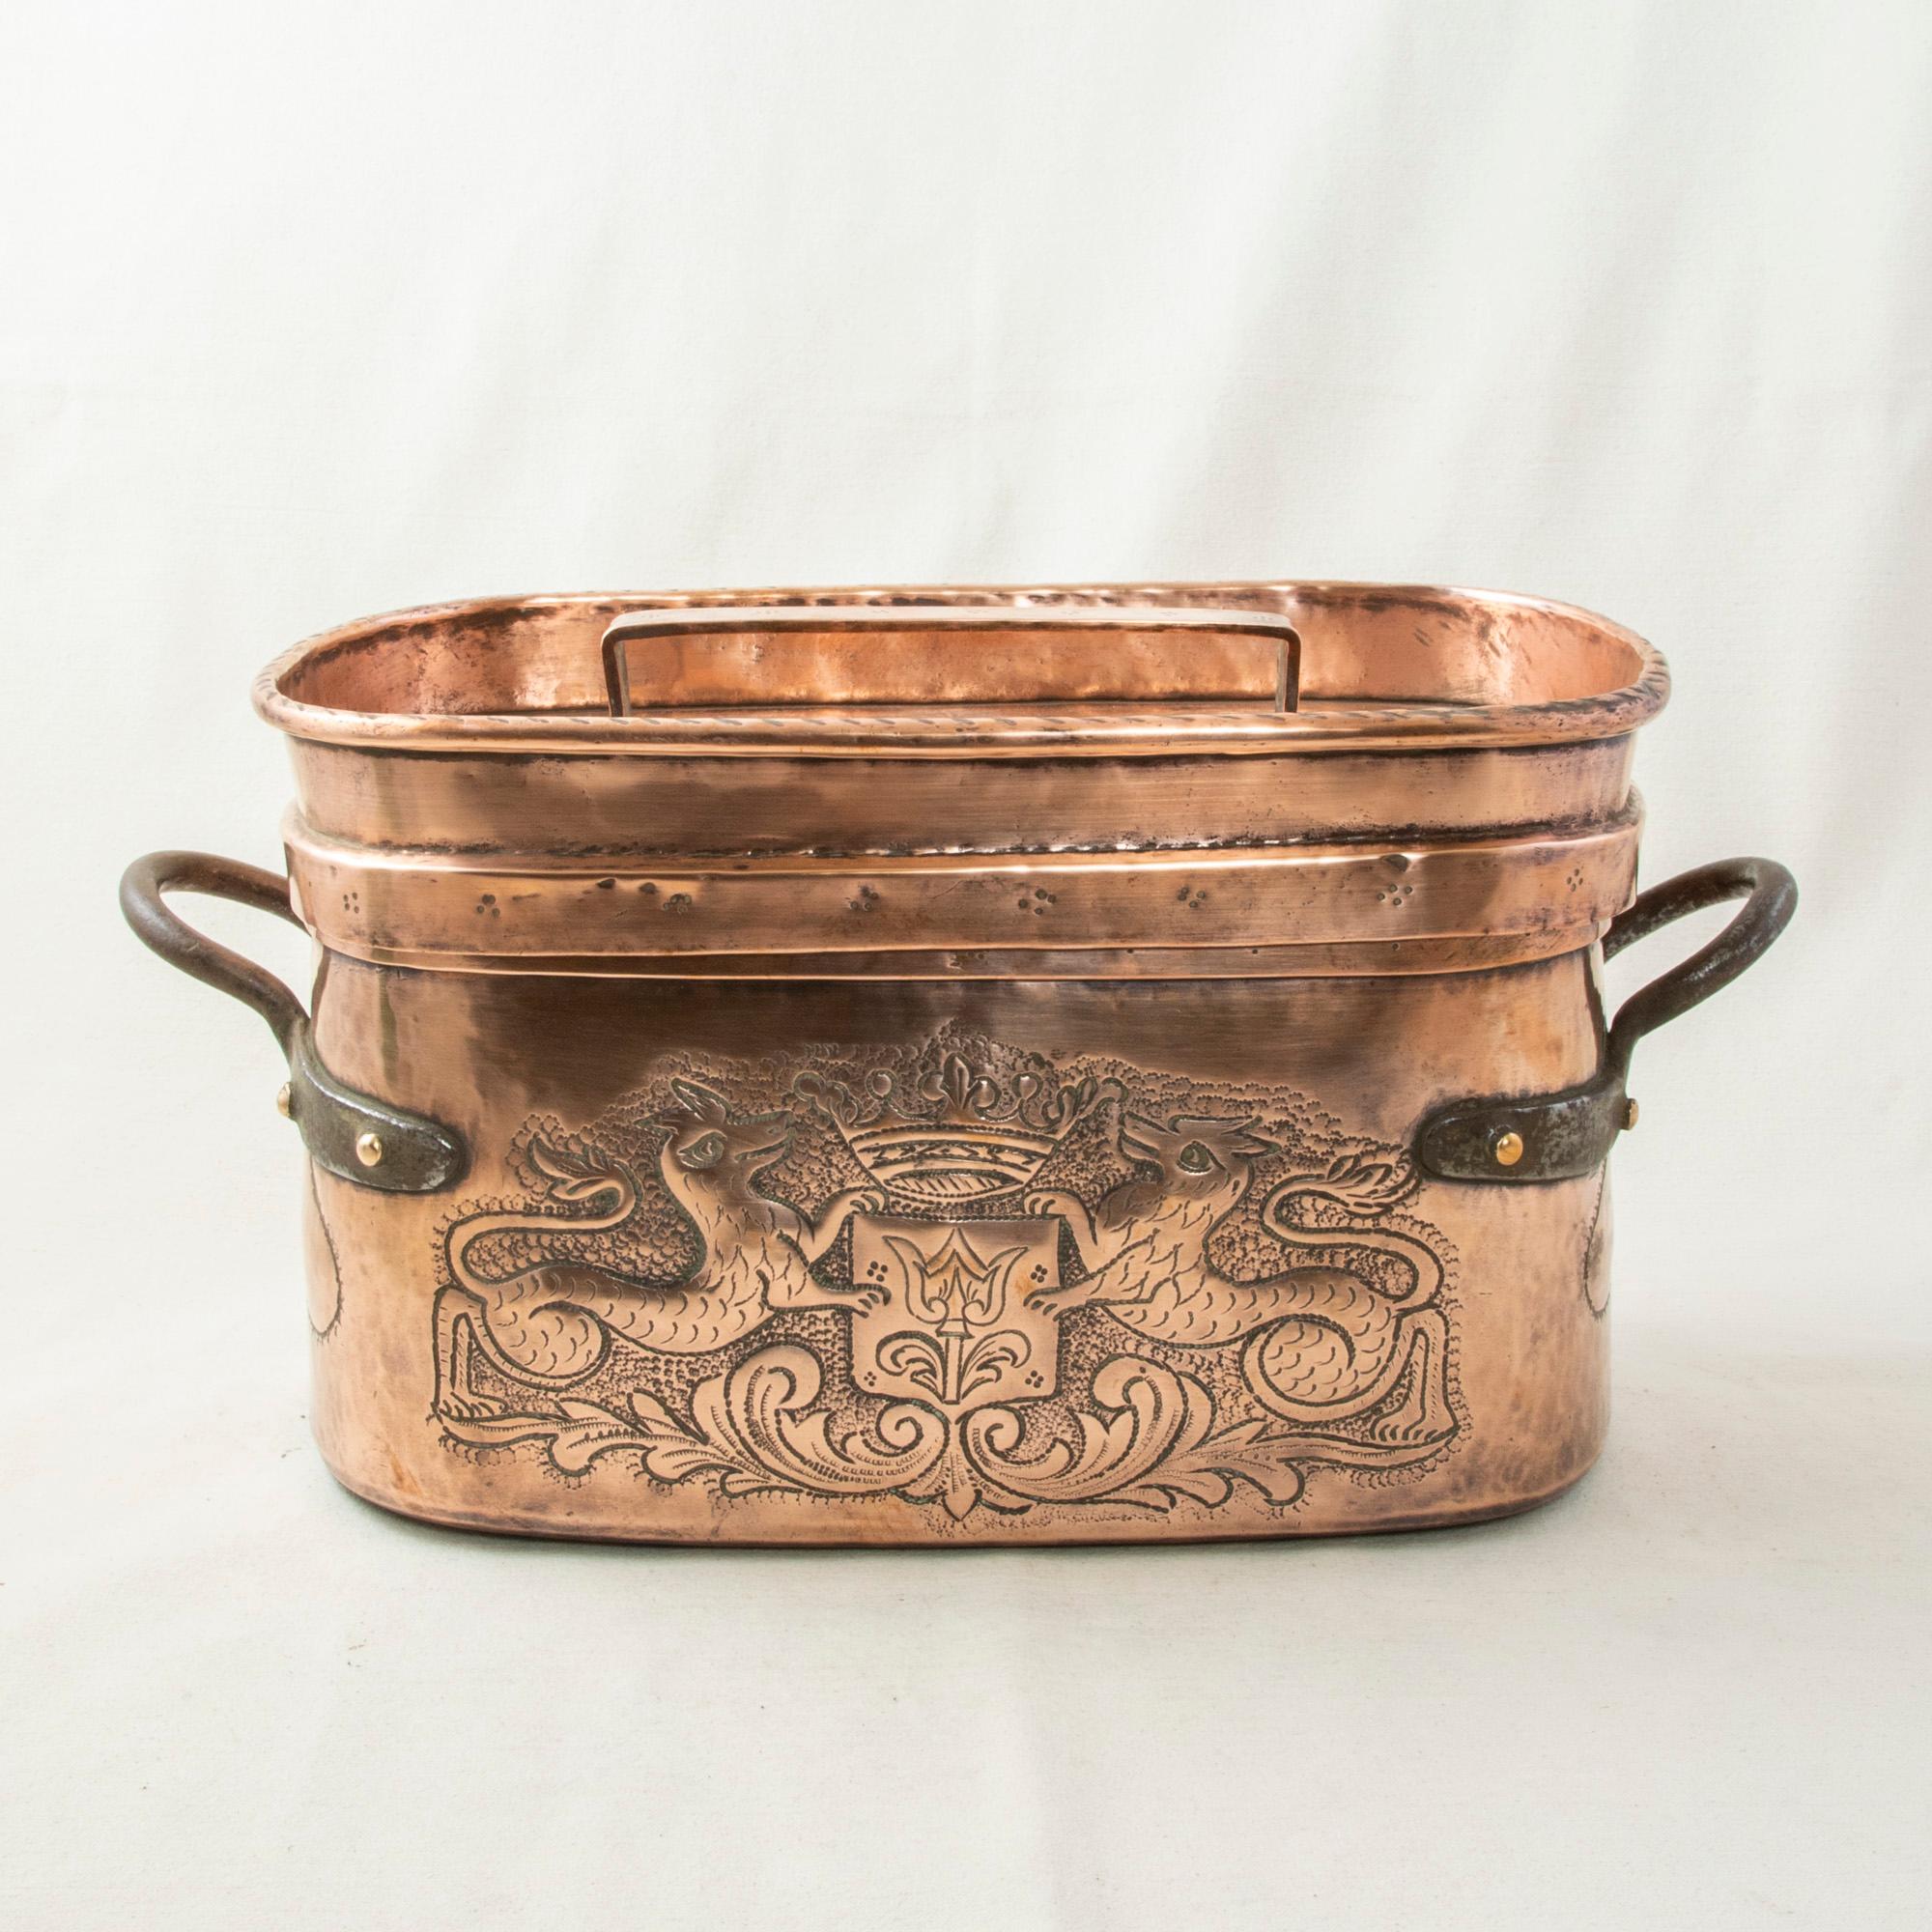 Originally used in a chateau, this mid-nineteenth century French copper repousse braising pot with lid is called a daubiere in French. This piece features a hand hammered repousse coat of arms on one side flanked by lions with a crown above. On the